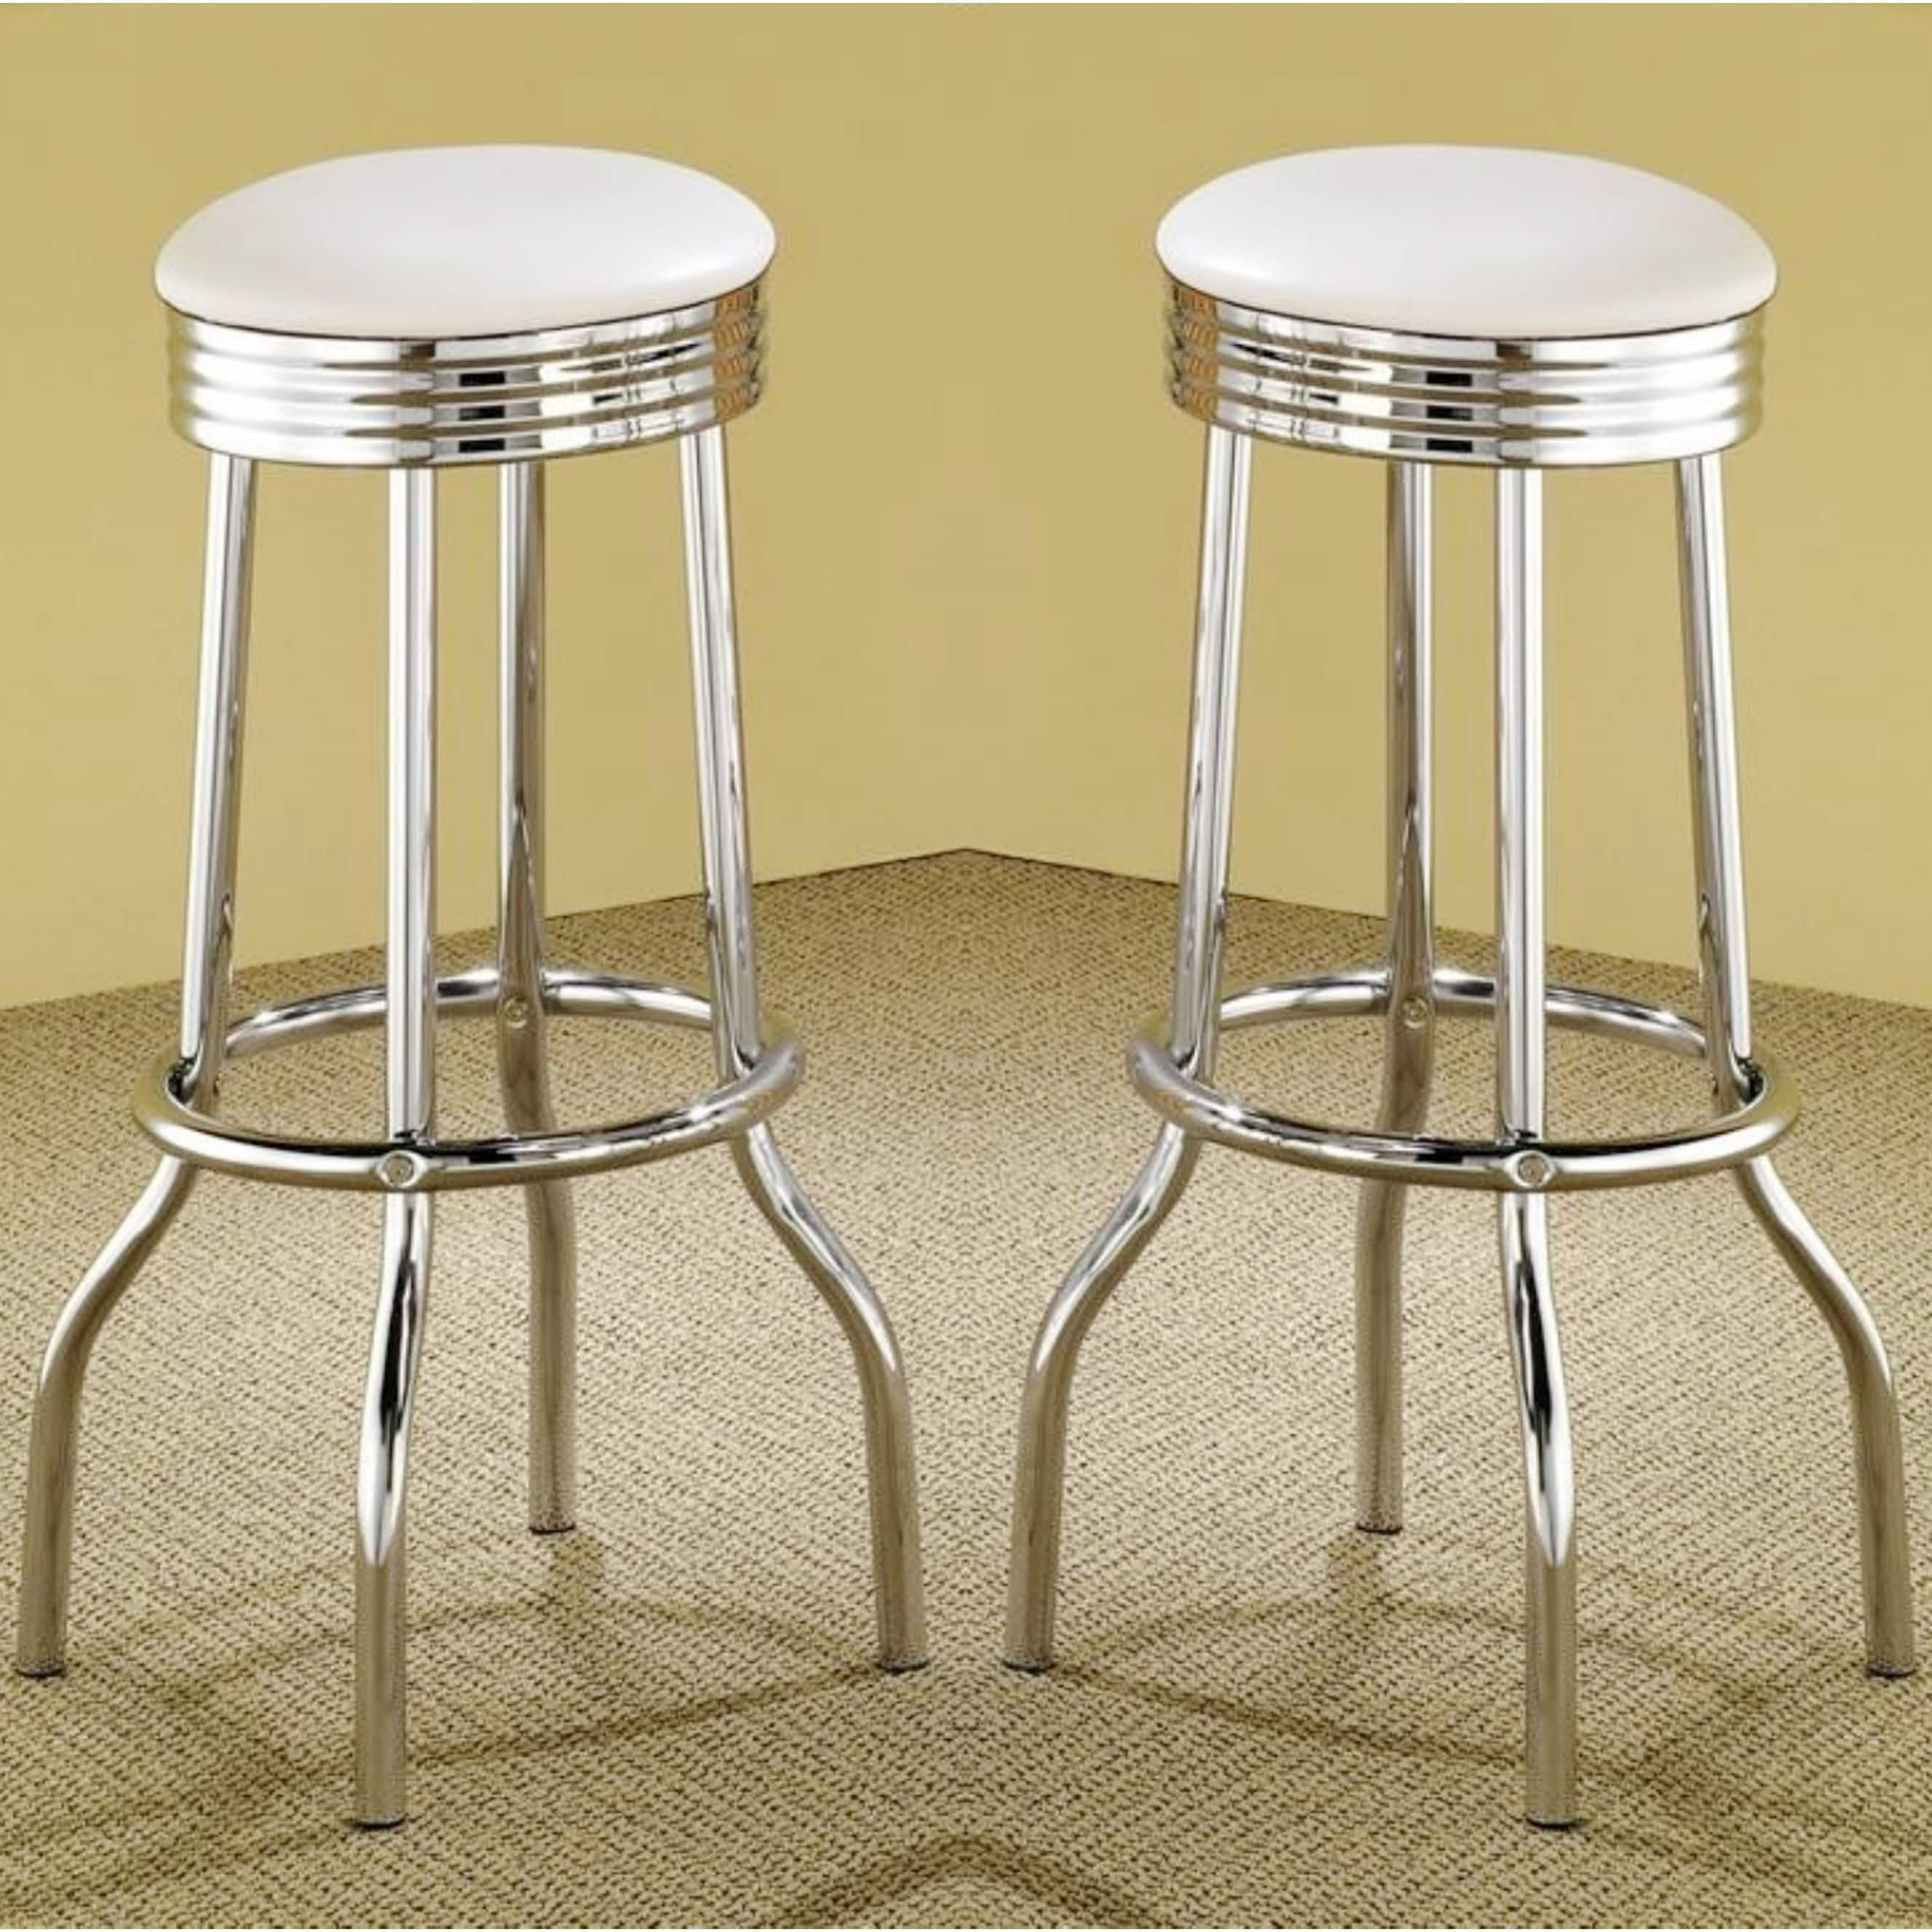 Swivel Red and Chrome retro bar stools 29"Height. Set of 2 